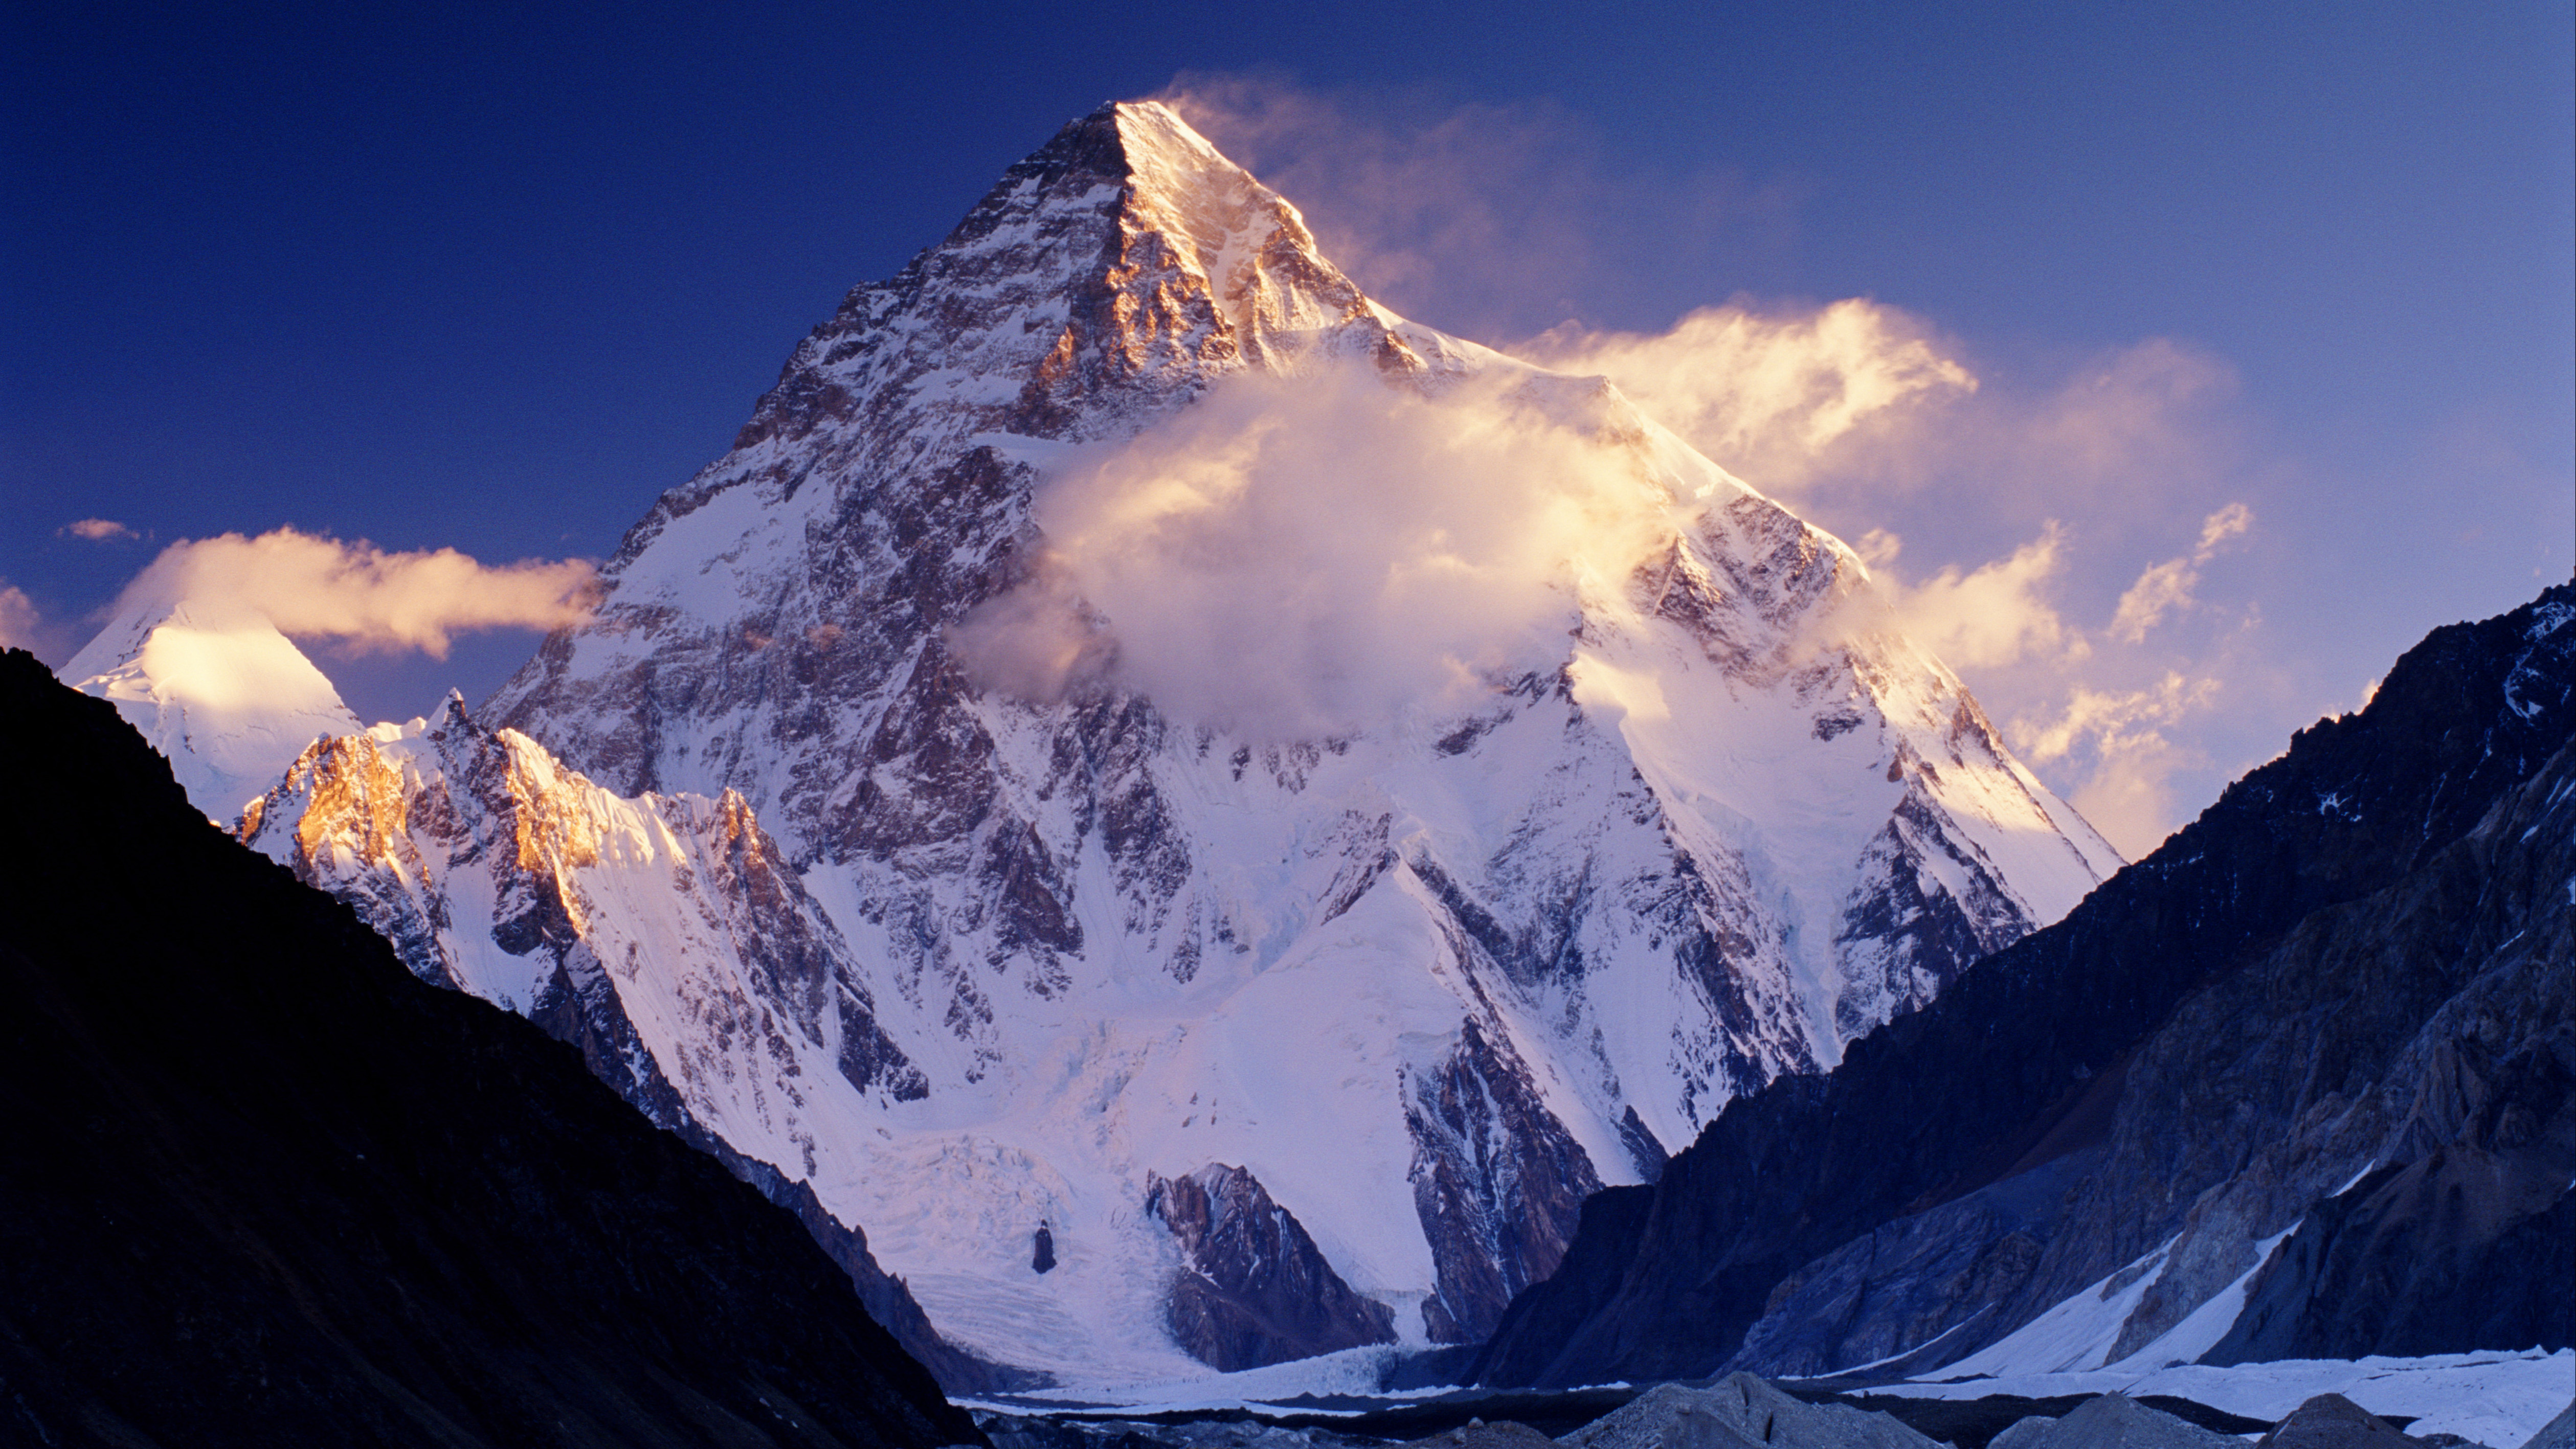 Photos: World's 12 most iconic mountains